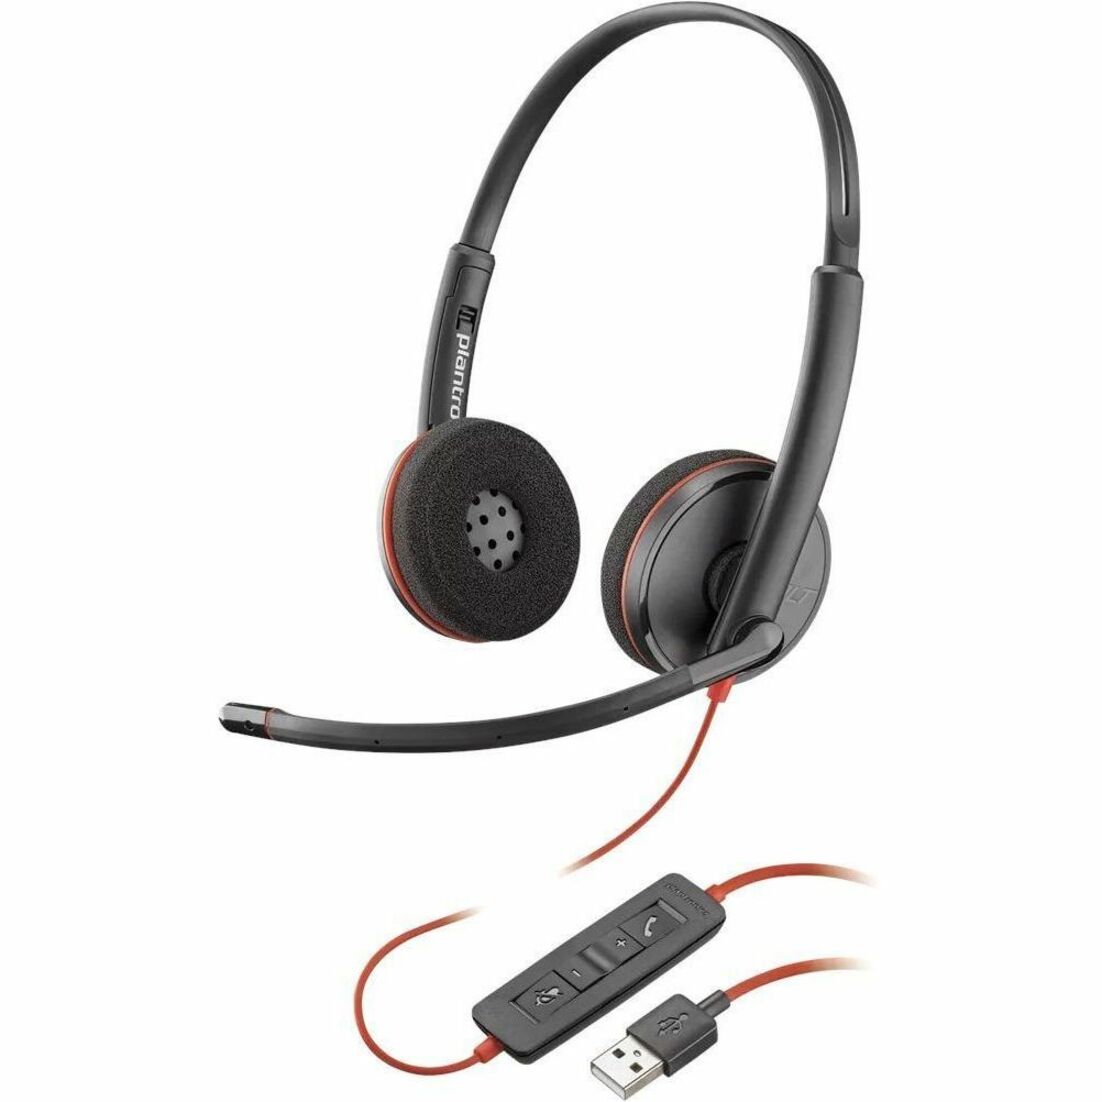 Poly Blackwire C3220 Headset, Lightweight, Noise Cancelling, USB Type A, 2 Year Warranty